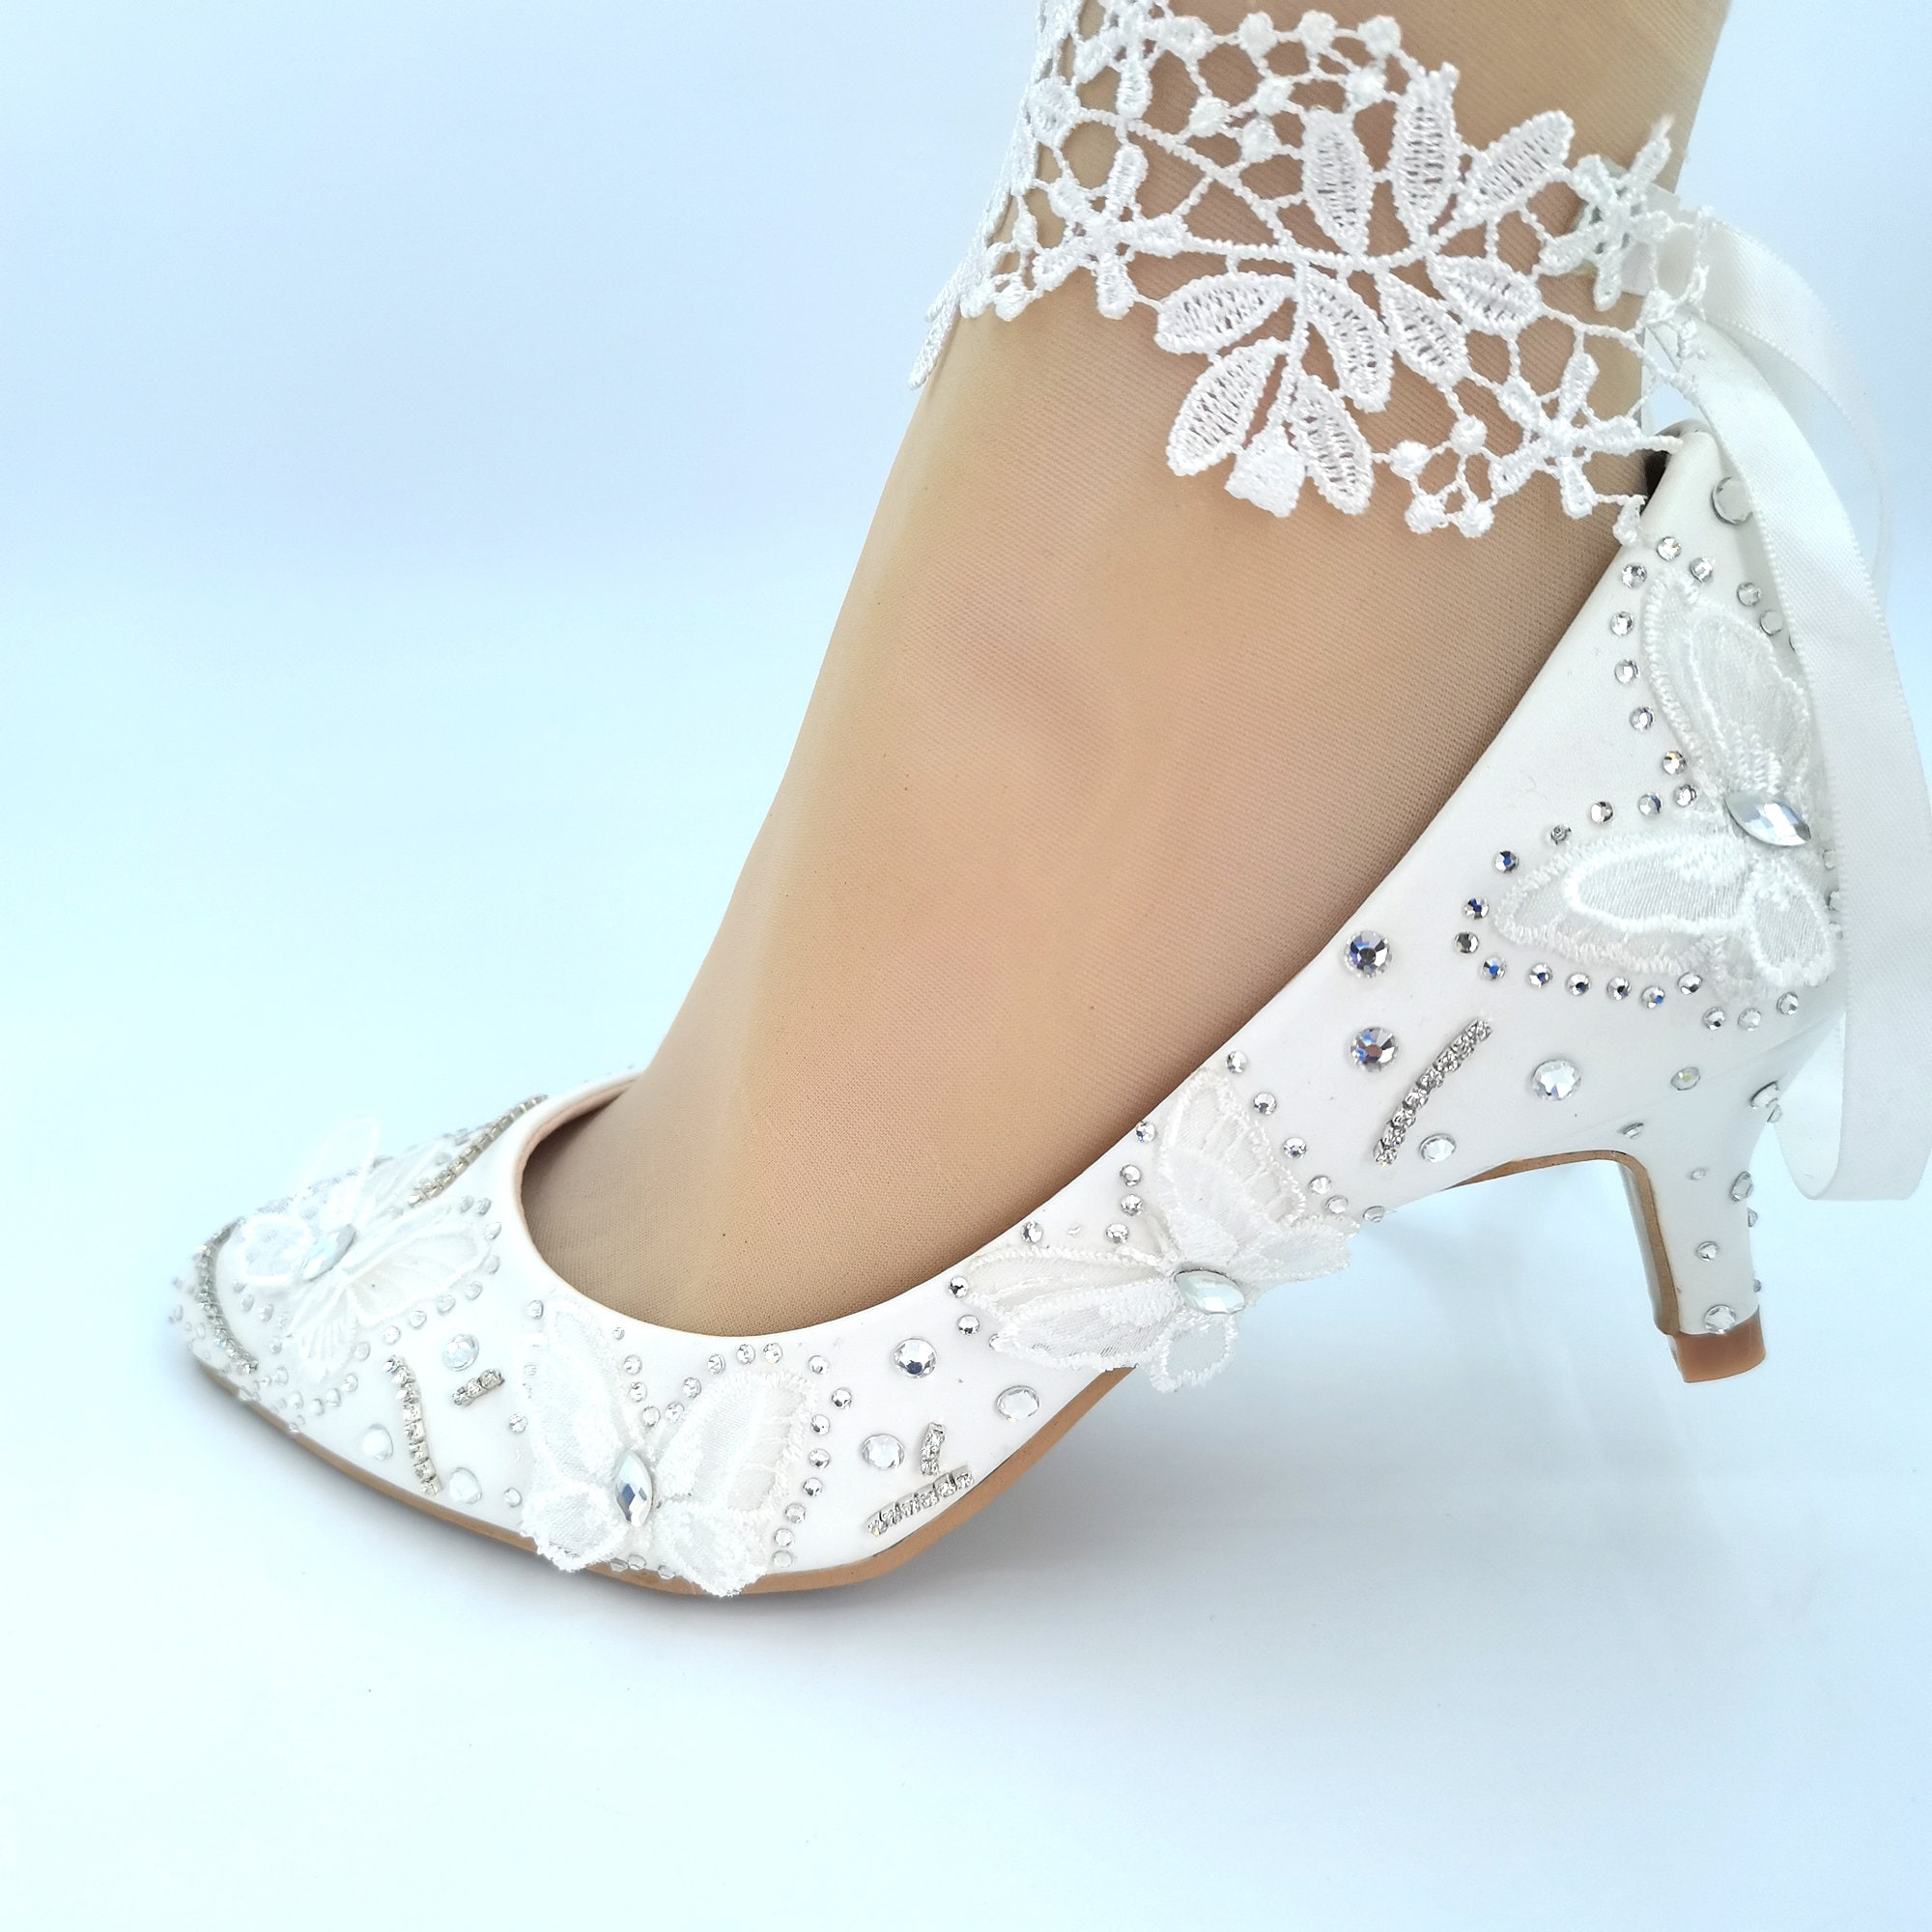 Women's White Lace High Heels Banquet Wedding Party Shoes | Fruugo BH